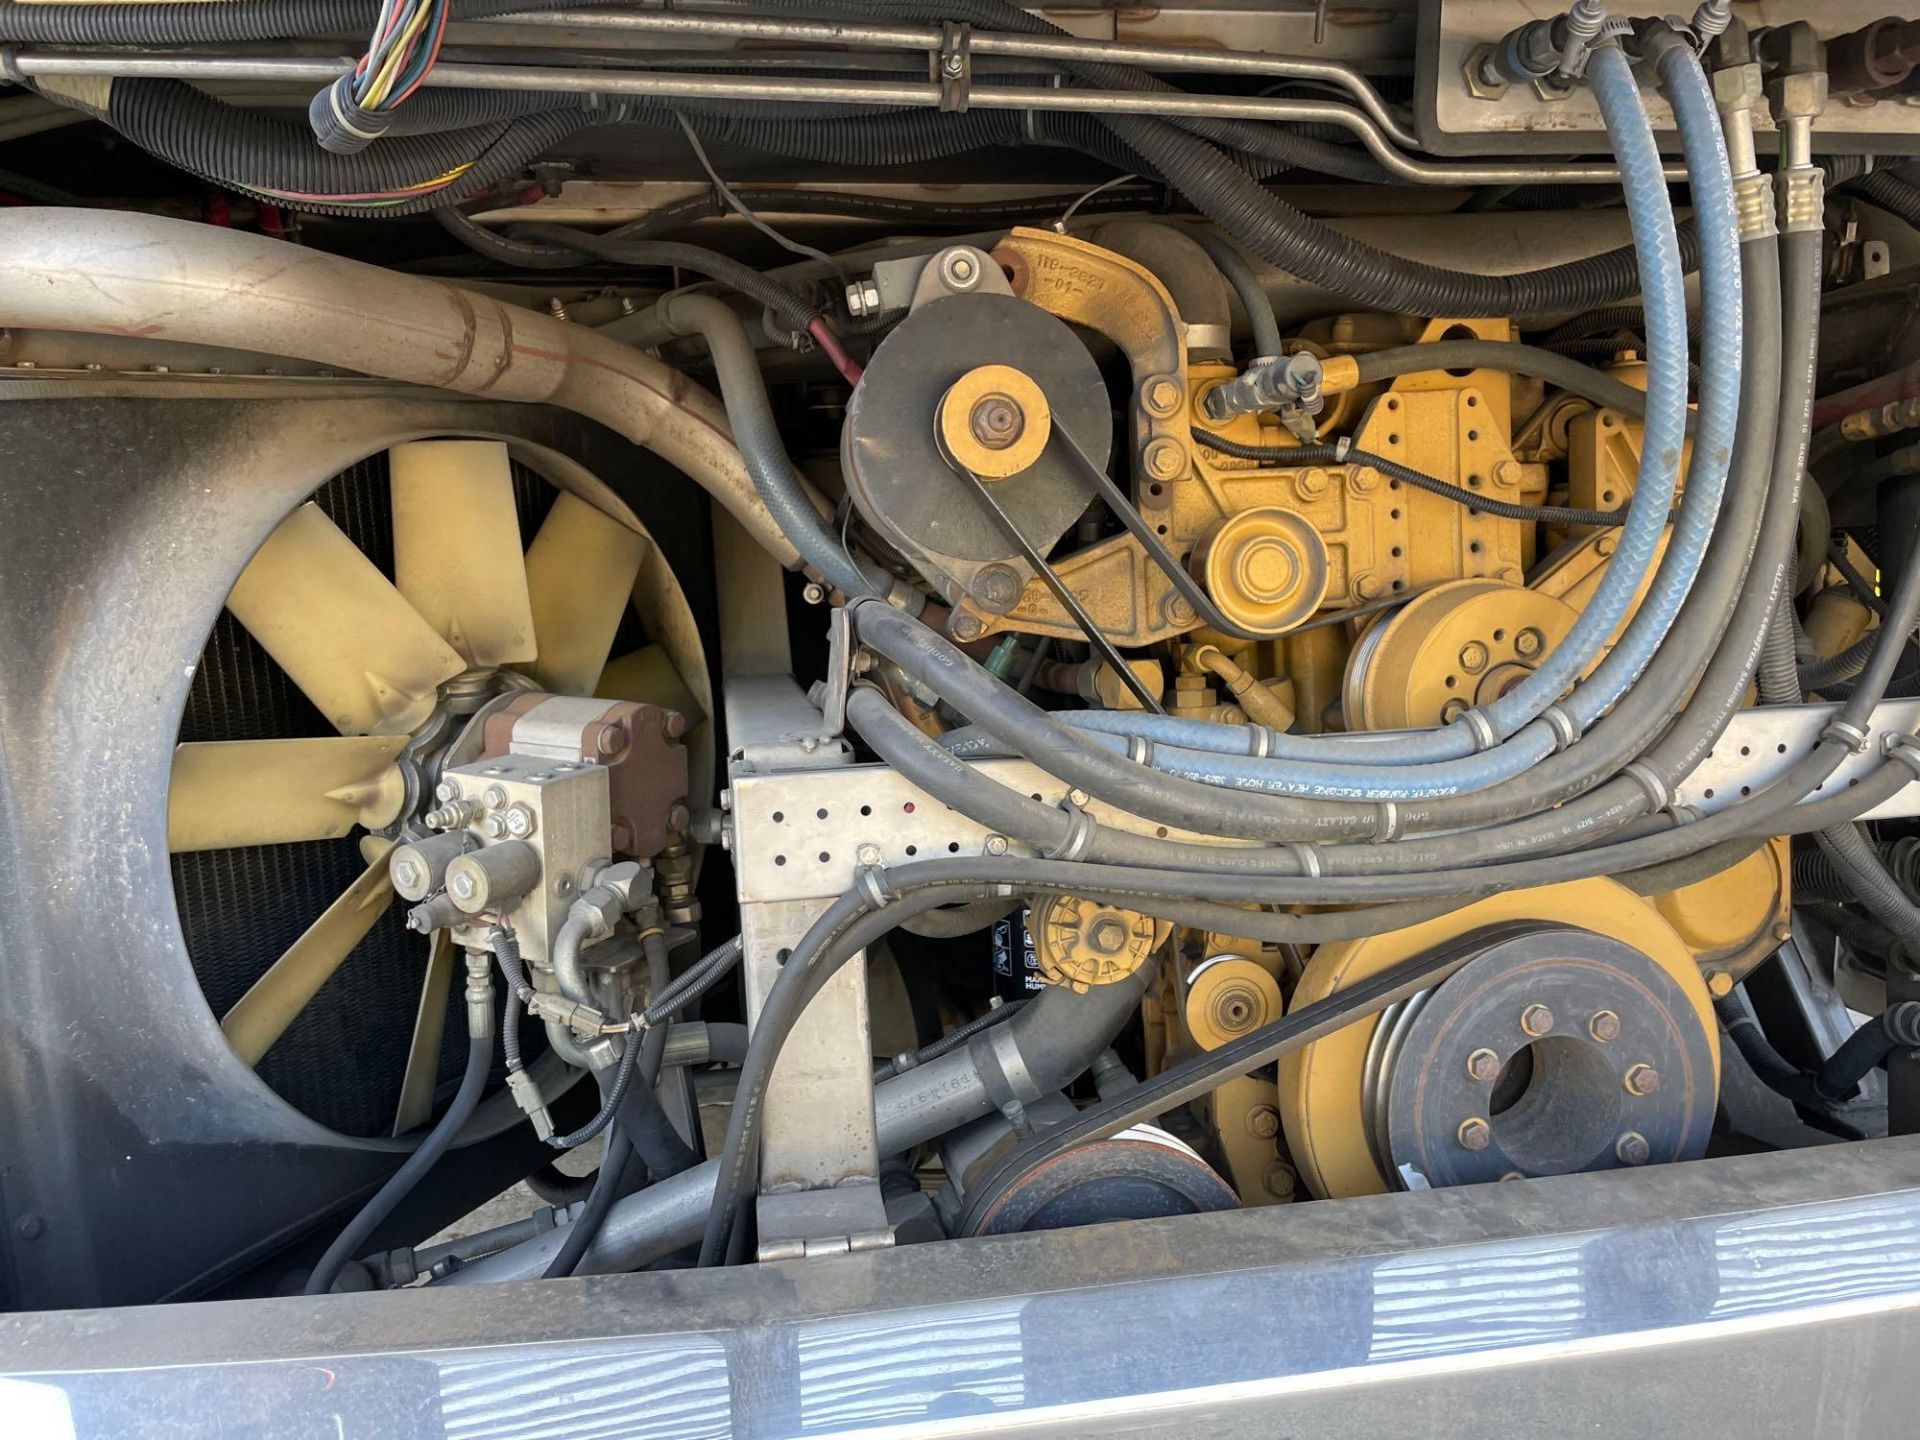 RV, Caterpillar Engine, 350 HP Allison Transmission, 10,143 Miles & 476 Hours, New 2003 - Image 18 of 25